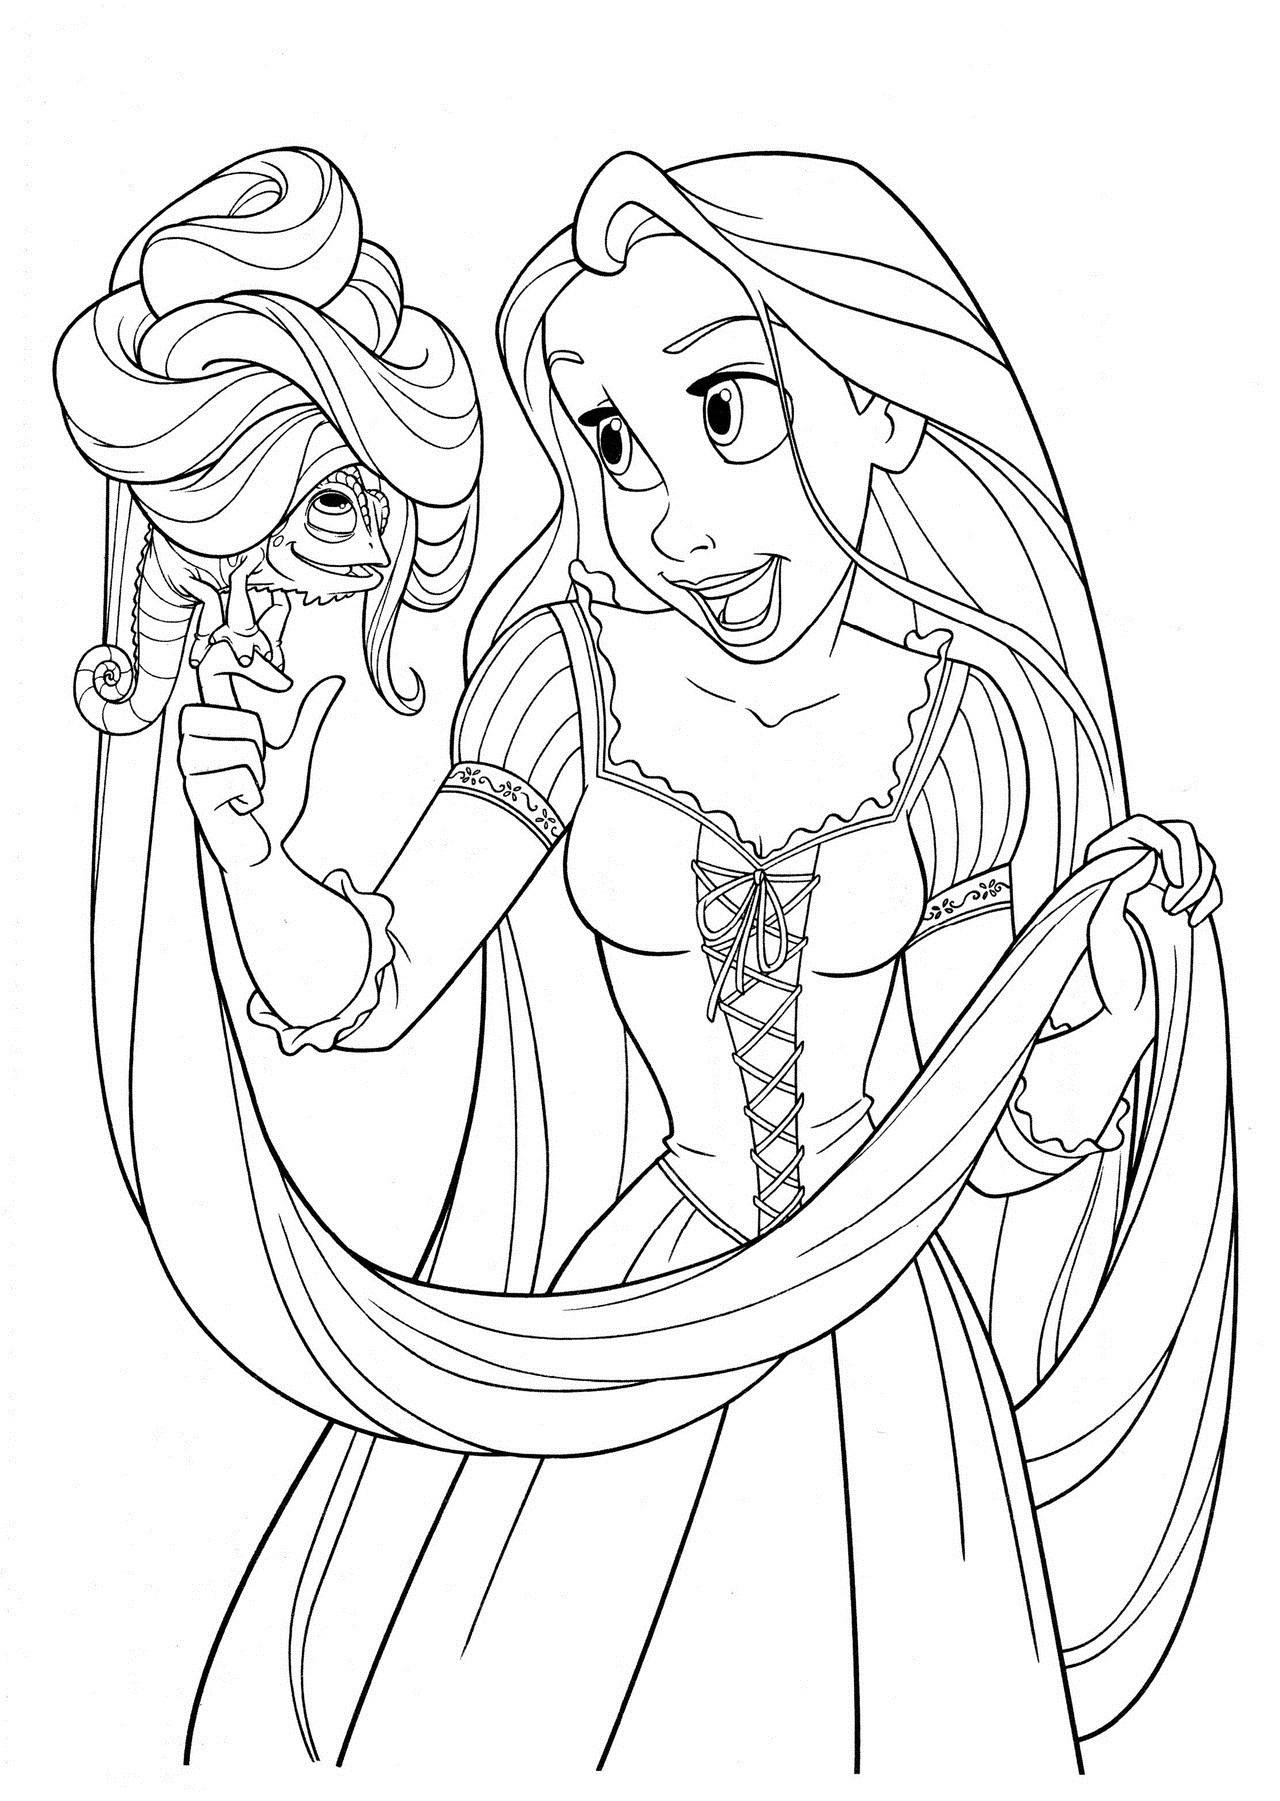 Coloring Book For Kids Online
 Free Printable Tangled Coloring Pages For Kids